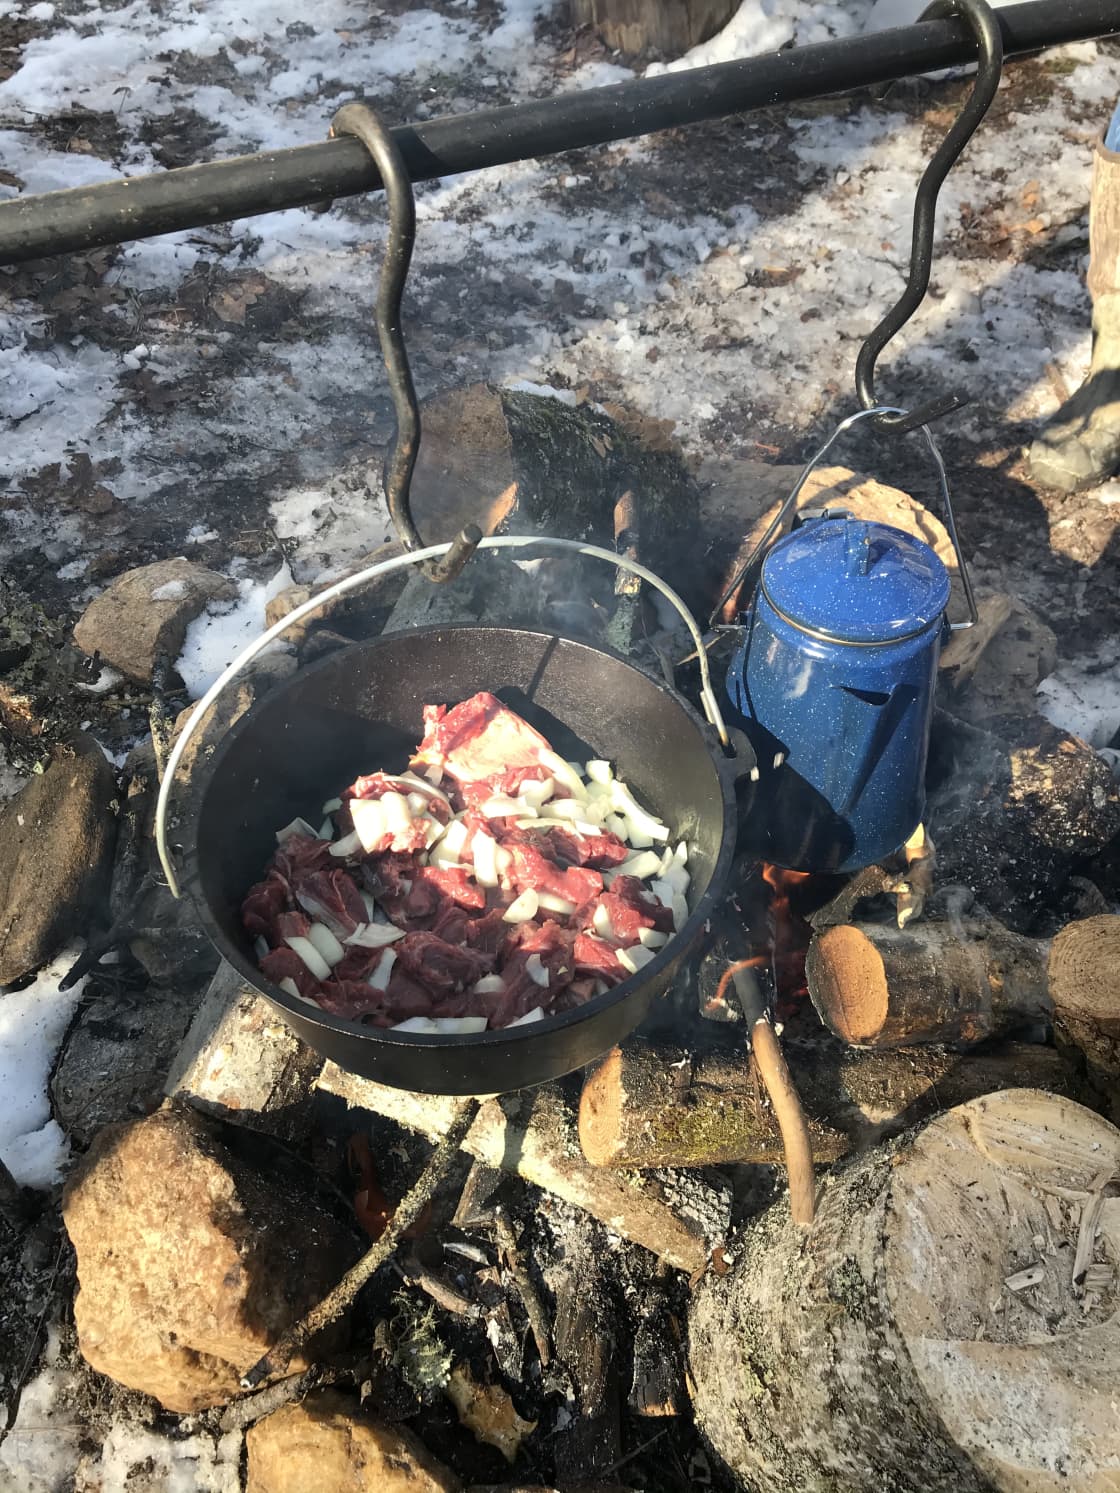 Campfire cooking at its finest.